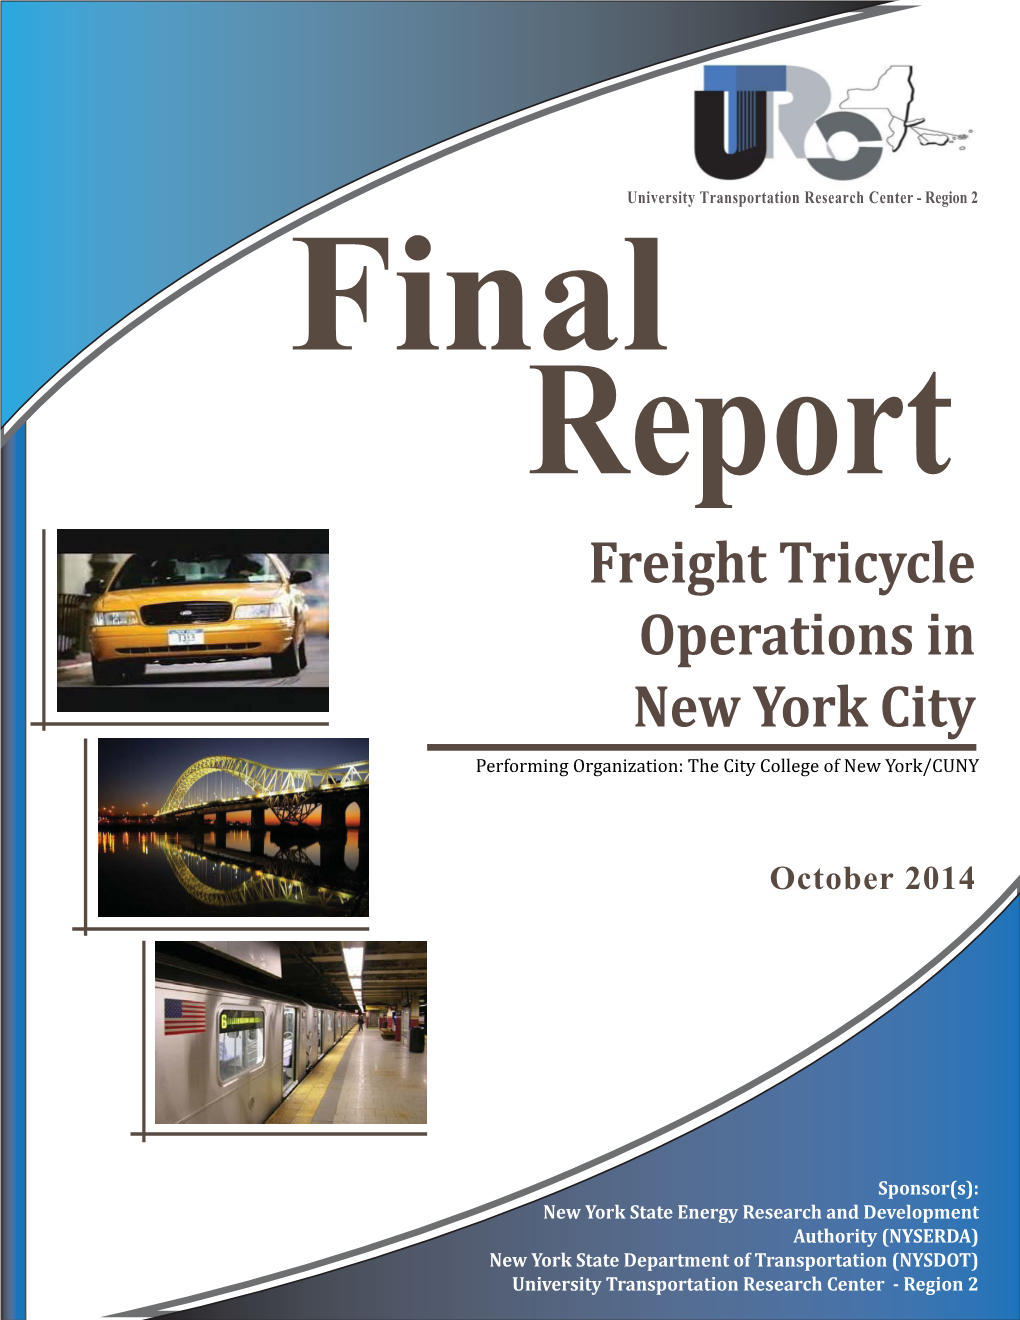 Freight Tricycle Operations in New York City Performing Organization: the City College of New York/CUNY